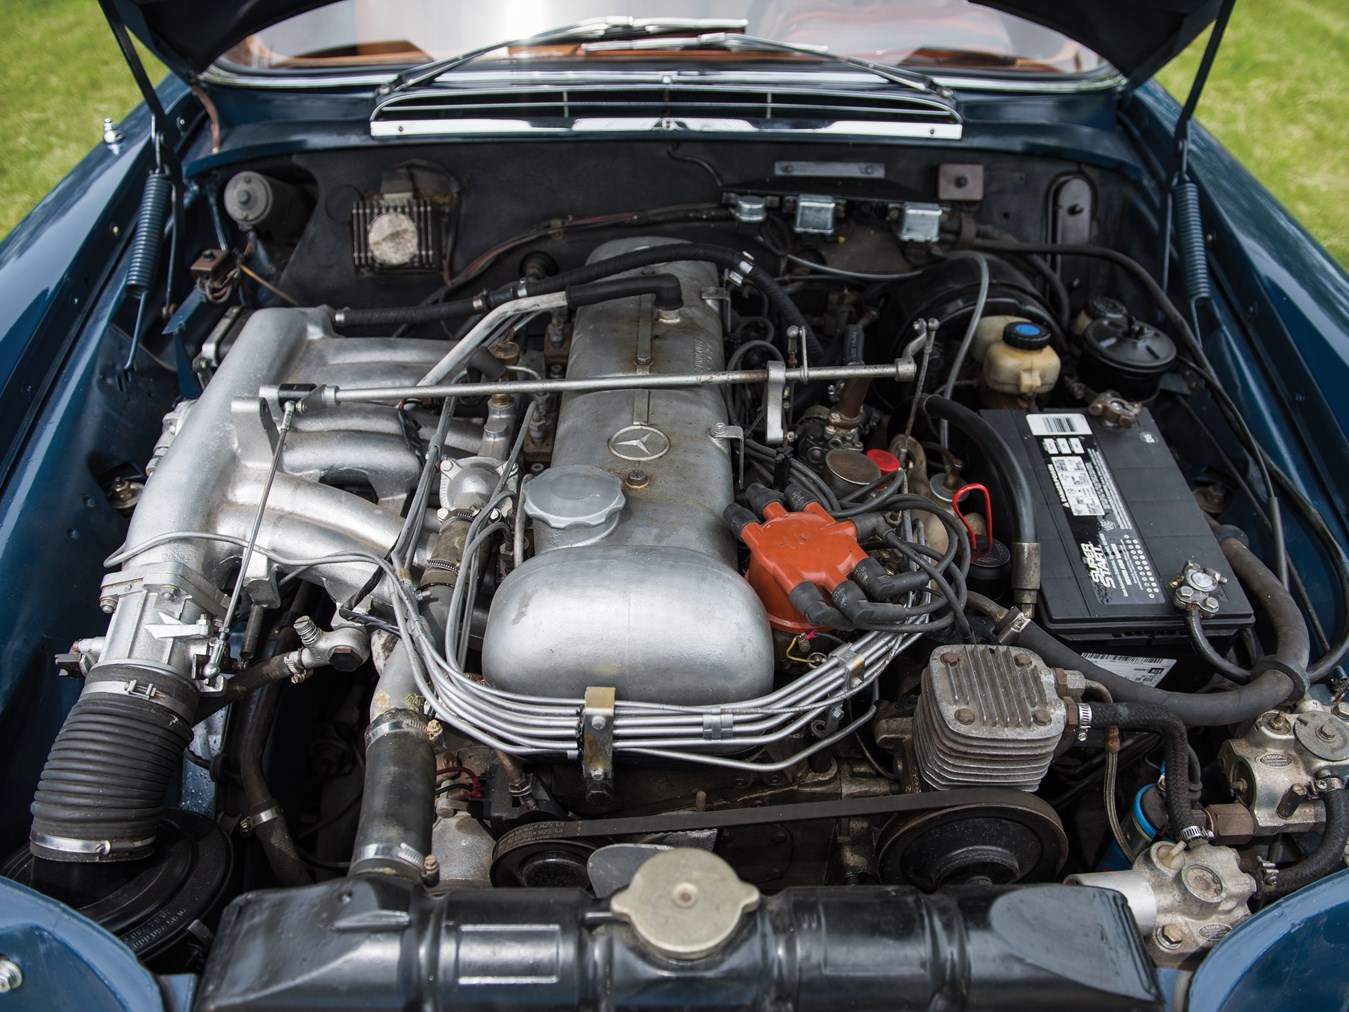 The M189 engine was uprated to produce 185bhp in 1964.